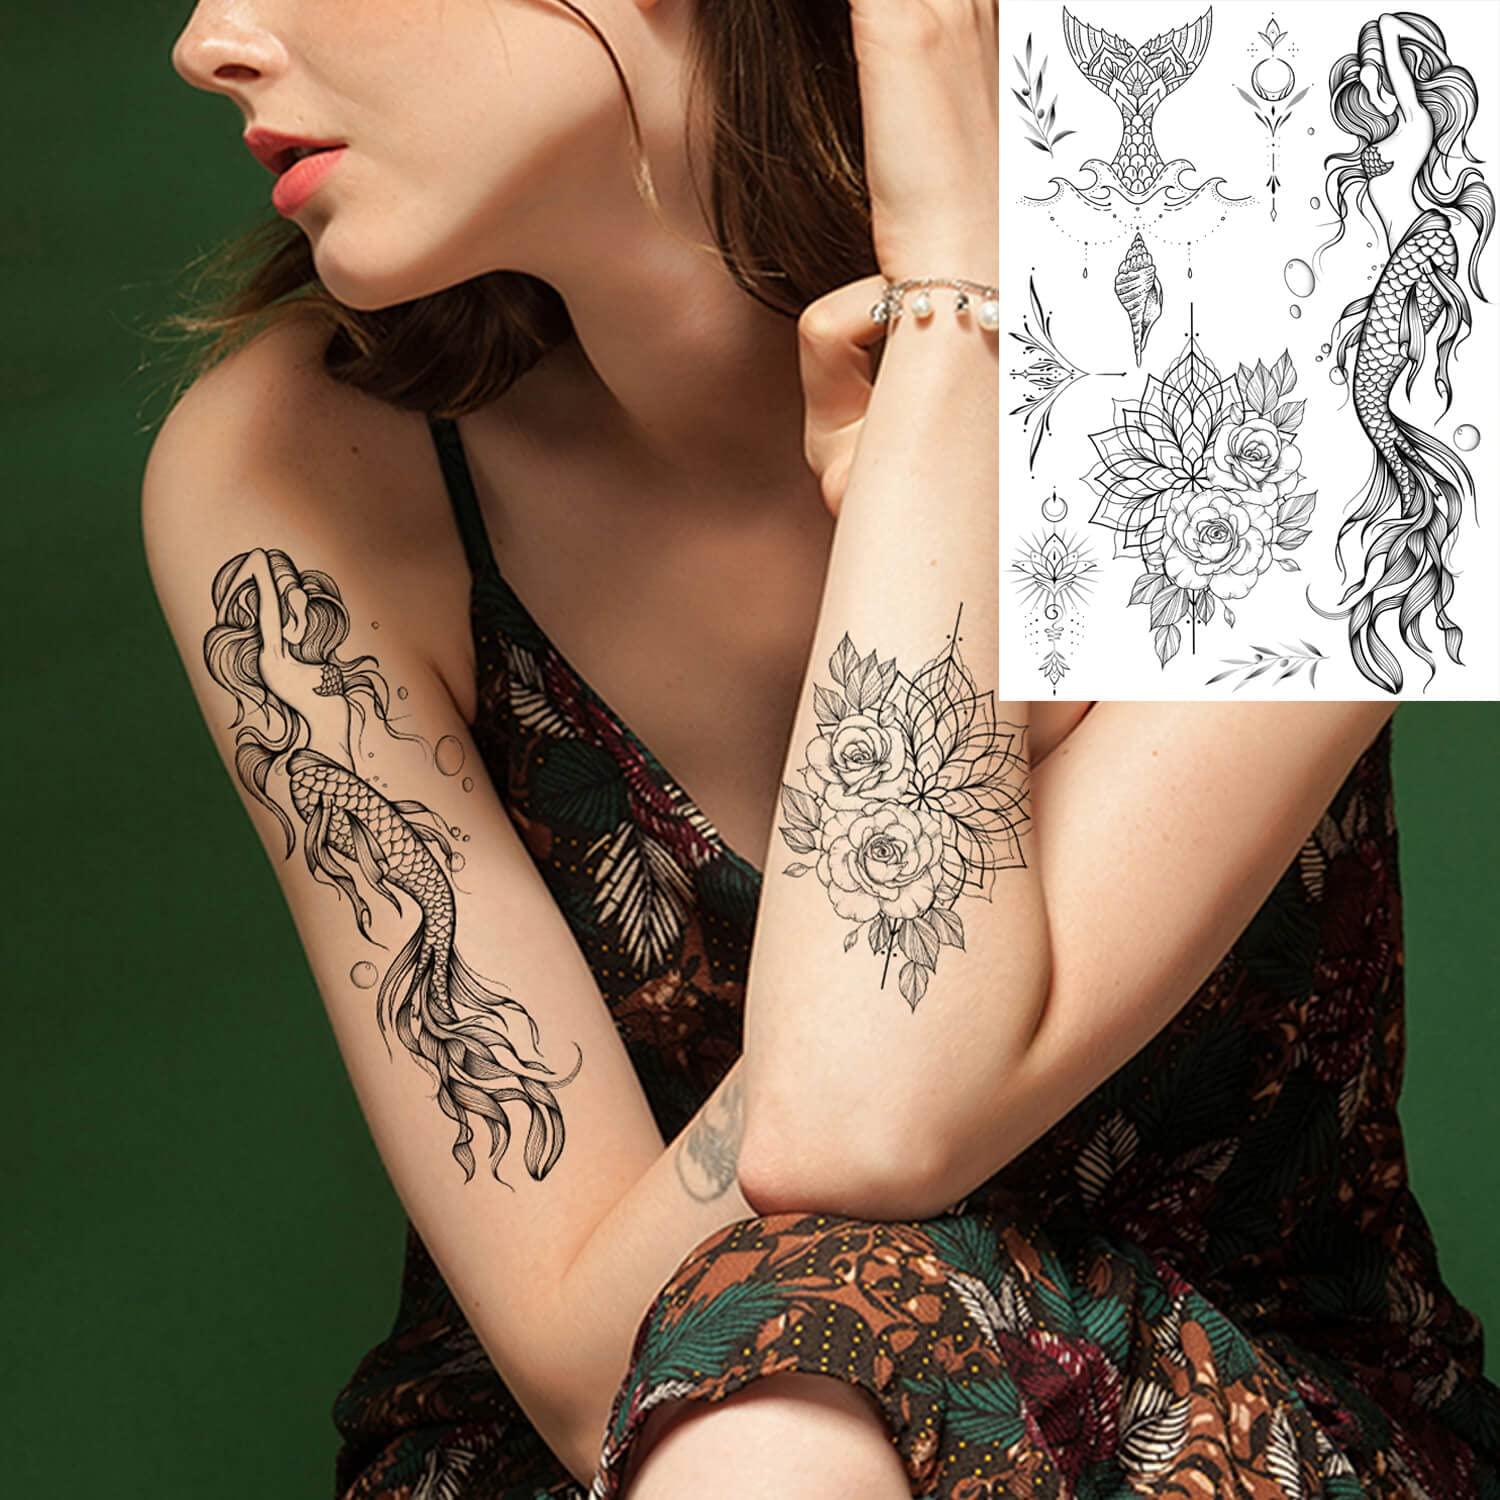 Tattoosday (A Tattoo Blog): Jasmine With Beautiful Flowers and Designs (at  the Mermaid Parade)